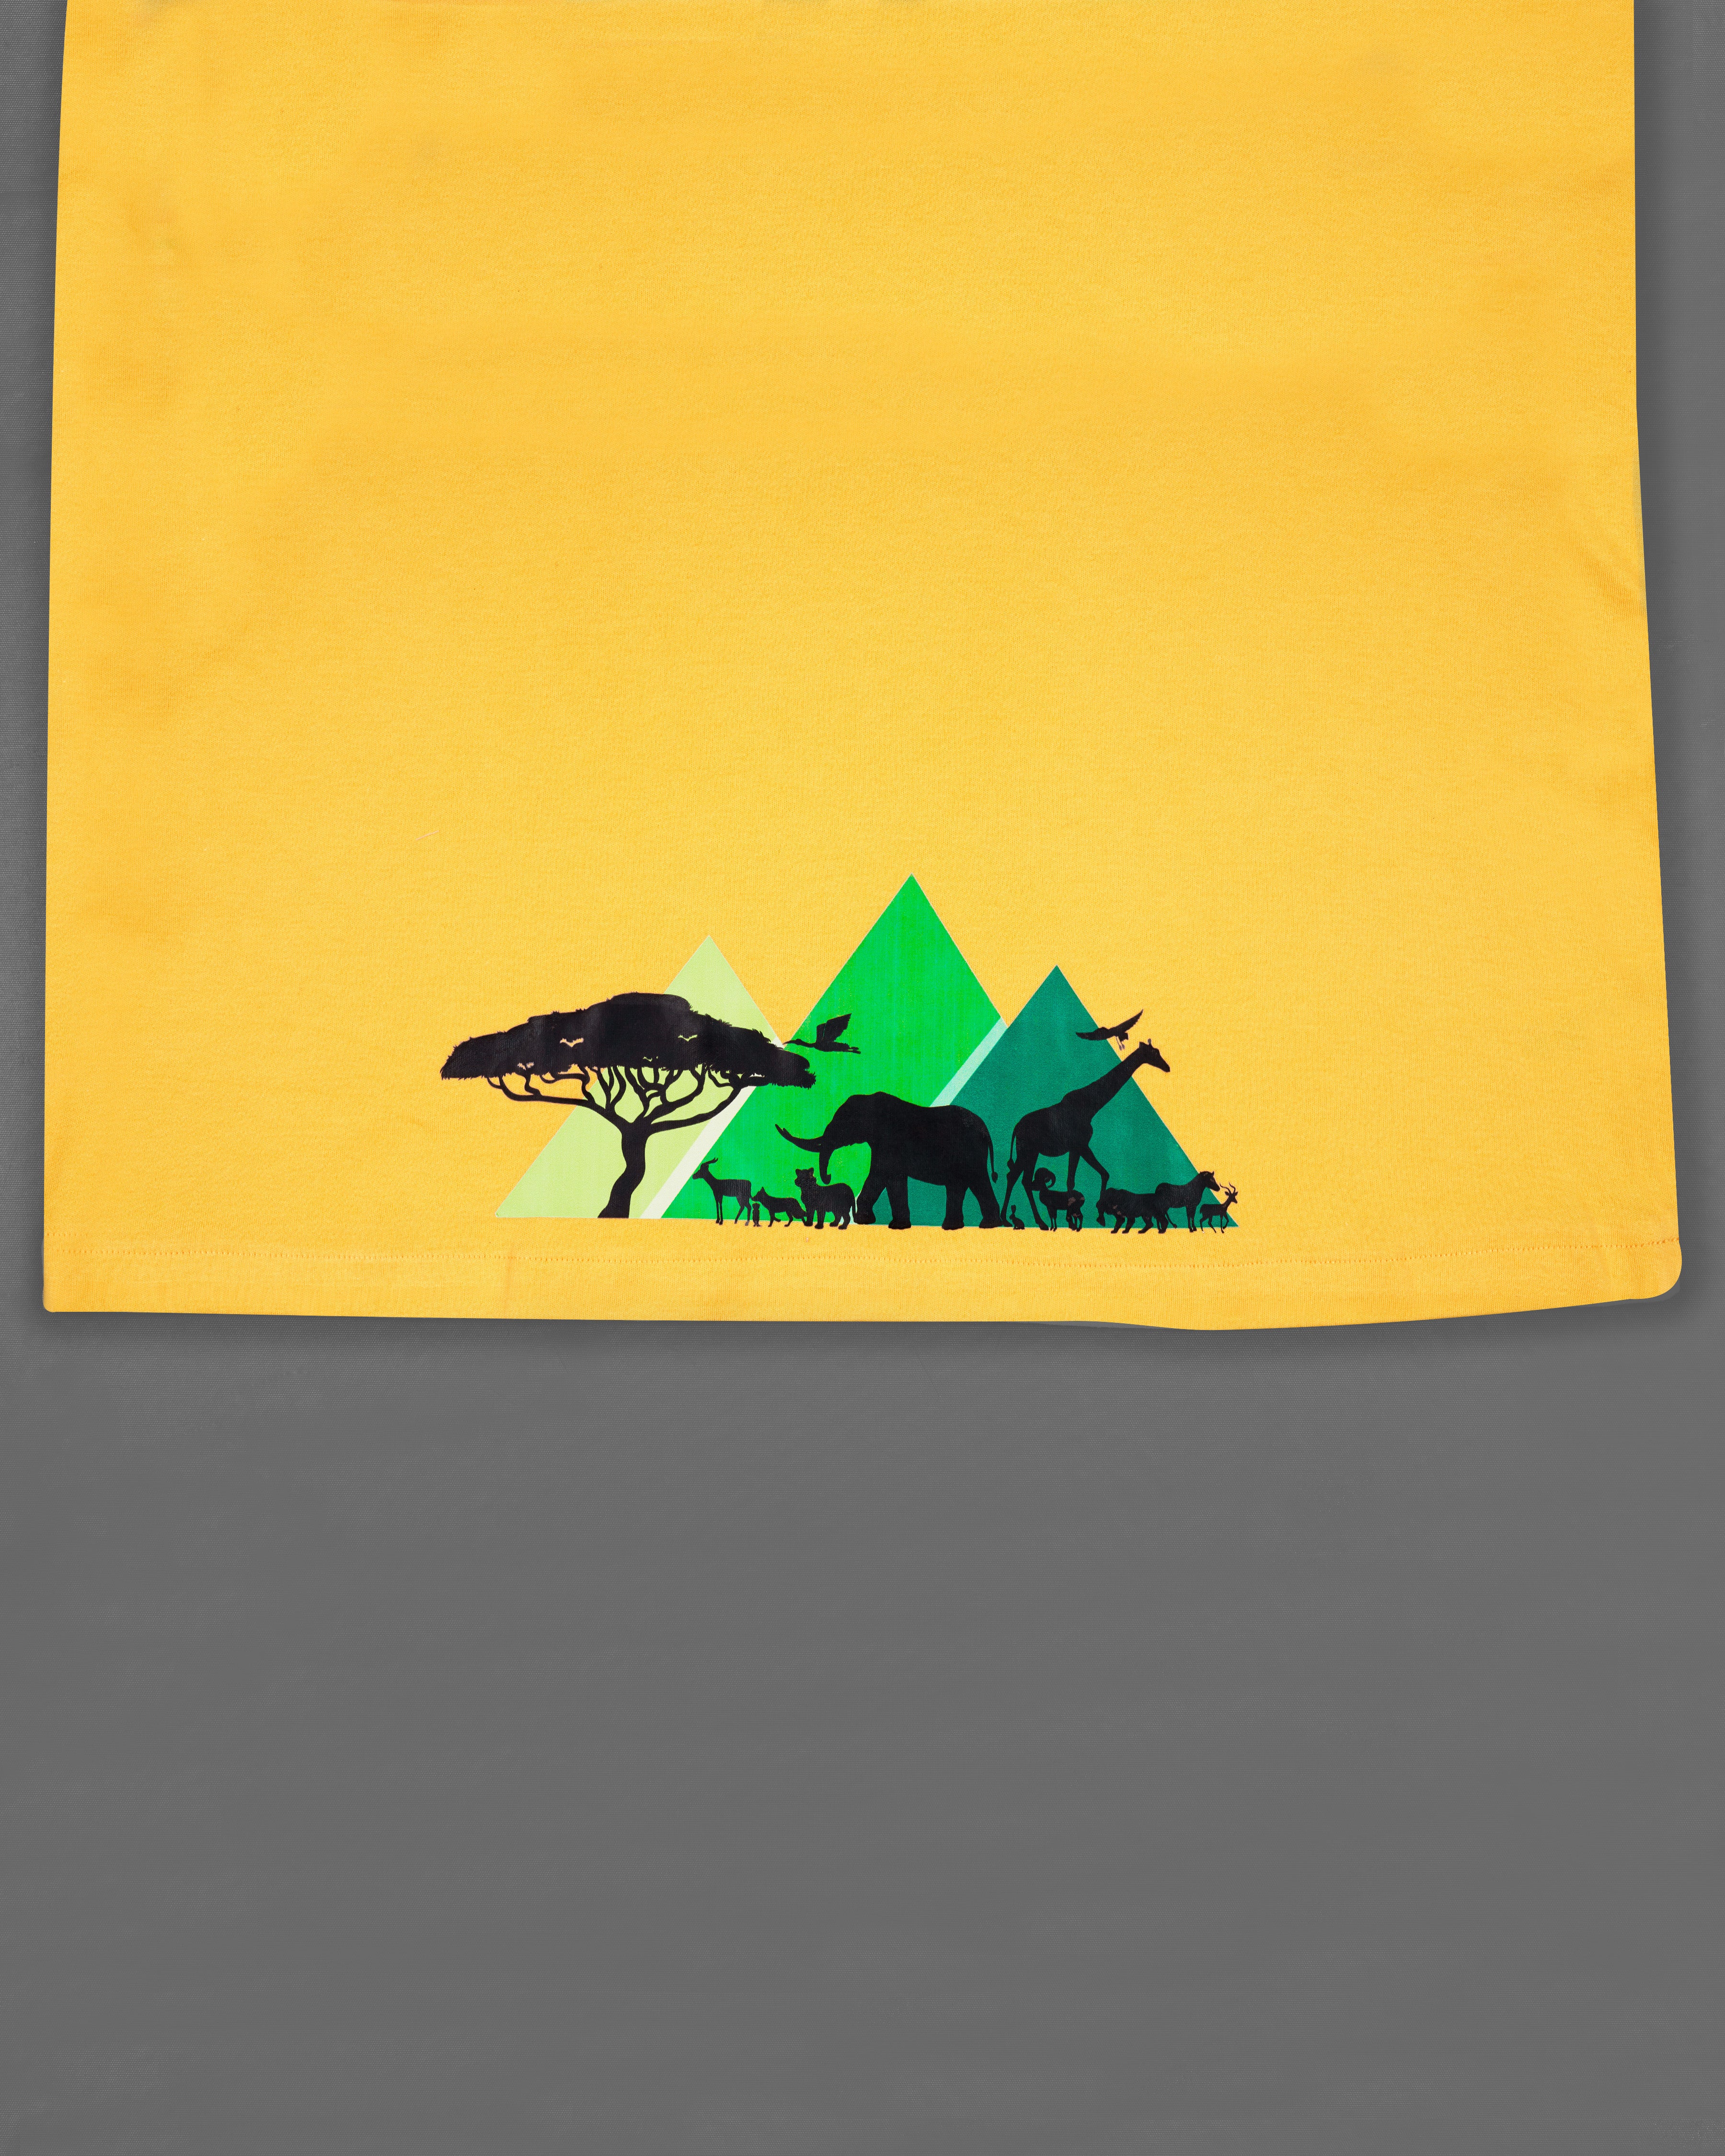 Sunglow Yellow Tropical Rubber Printed Premium Cotton T-Shirt TS410-W01-S, TS410-W01-M, TS410-W01-L, TS410-W01-XL, TS410-W01-XXL